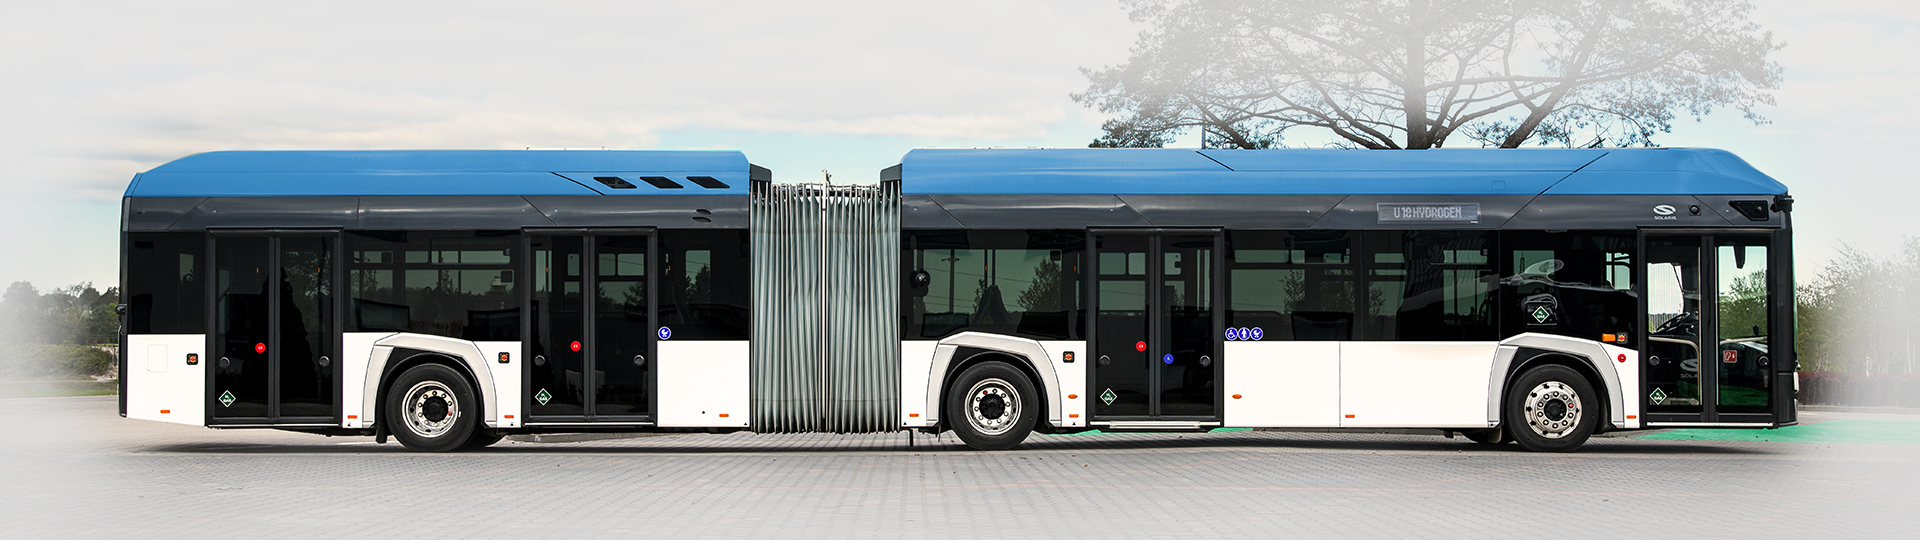 Solaris Urbino 18 hydrogen will compete for the Bus of the Year title